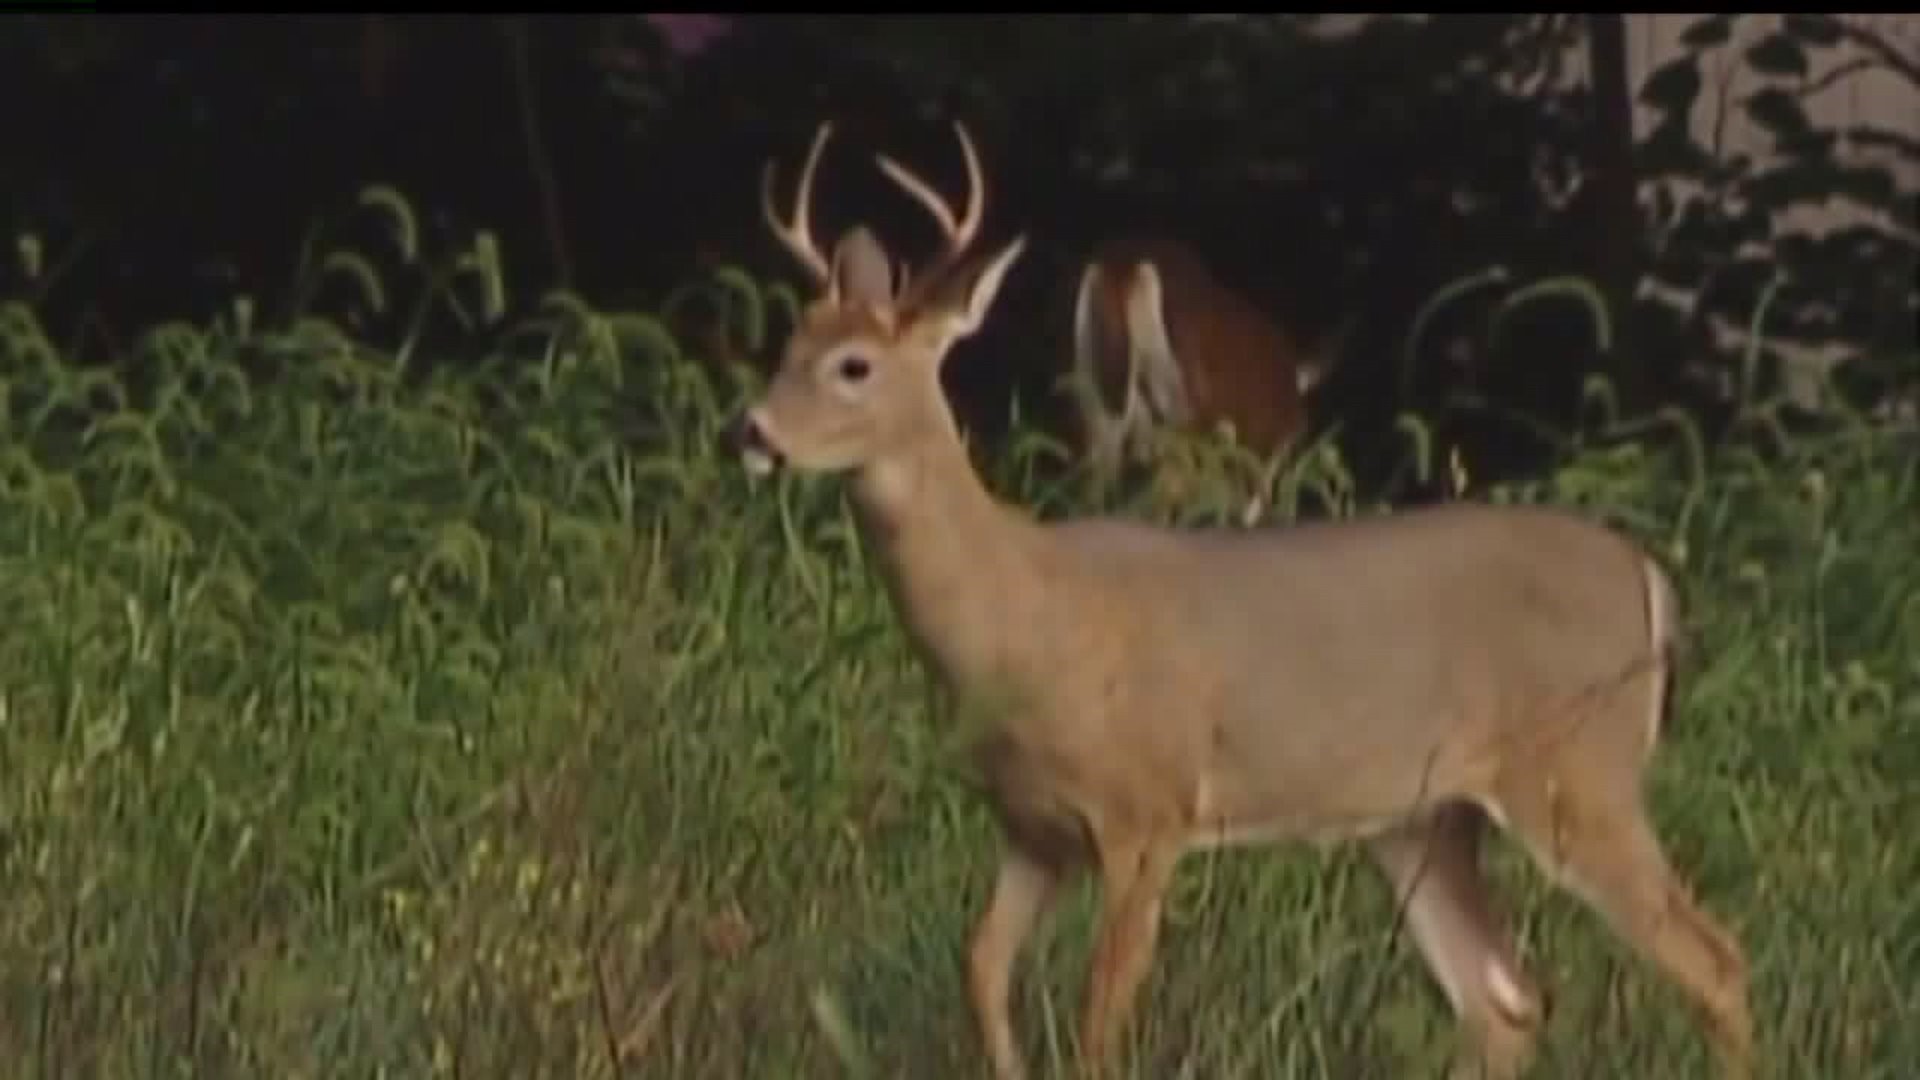 Hearing on CWD containment efforts